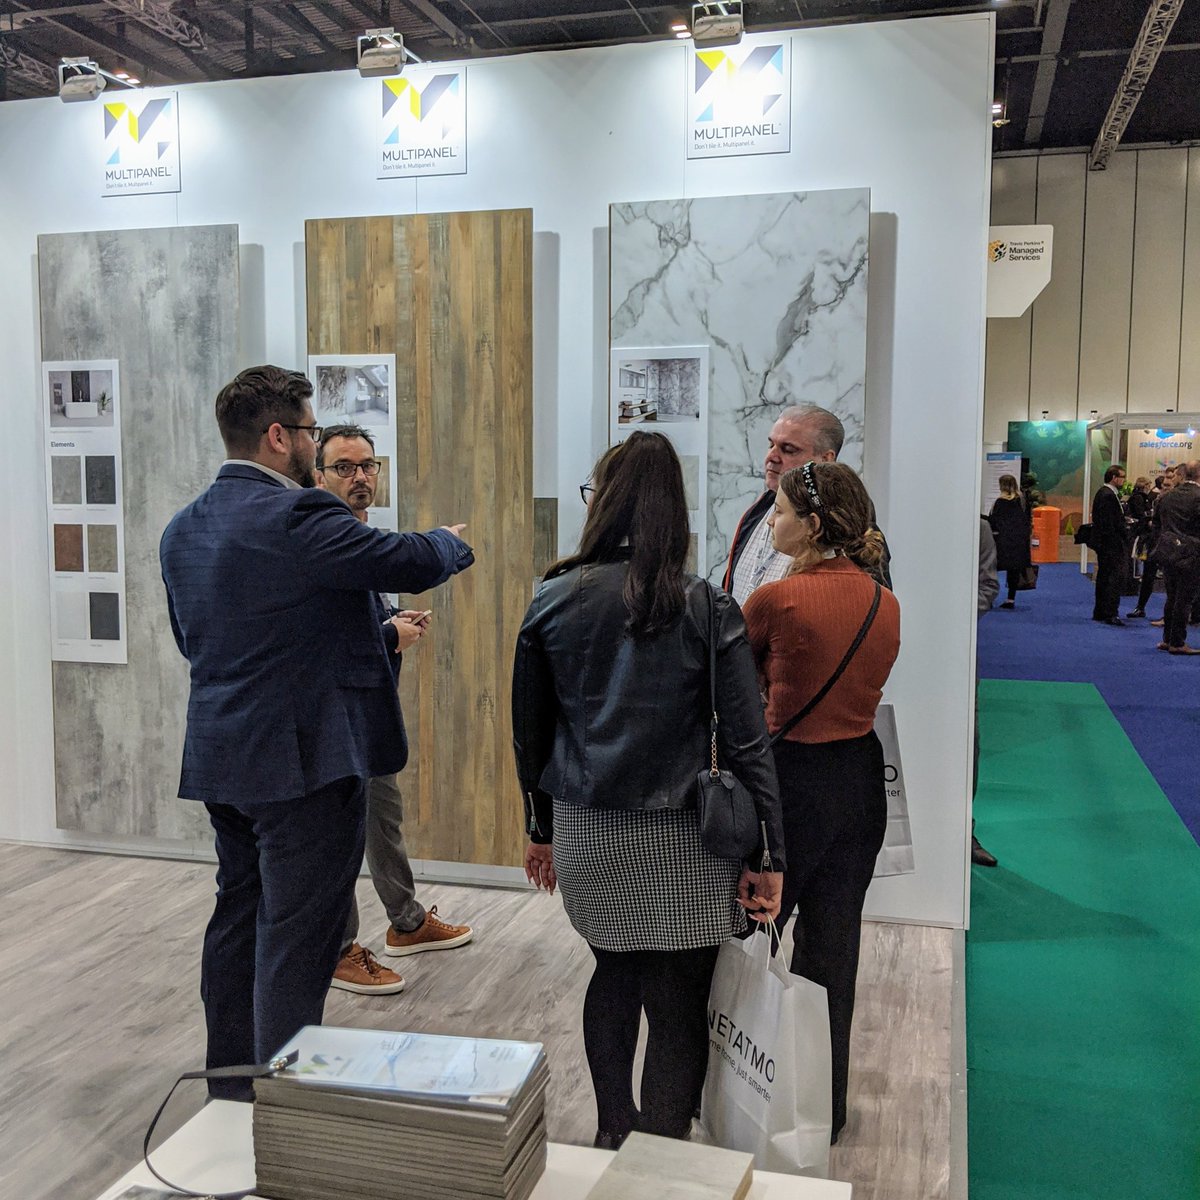 Great conversations going on at @HomesEvent around the benefits of choosing Multipanel wall panels over traditional tiling. #DecisionMakers are finding out how Multipanel can save money when refurbishing or installing bathrooms in the #SocialHousing sector #futureofliving